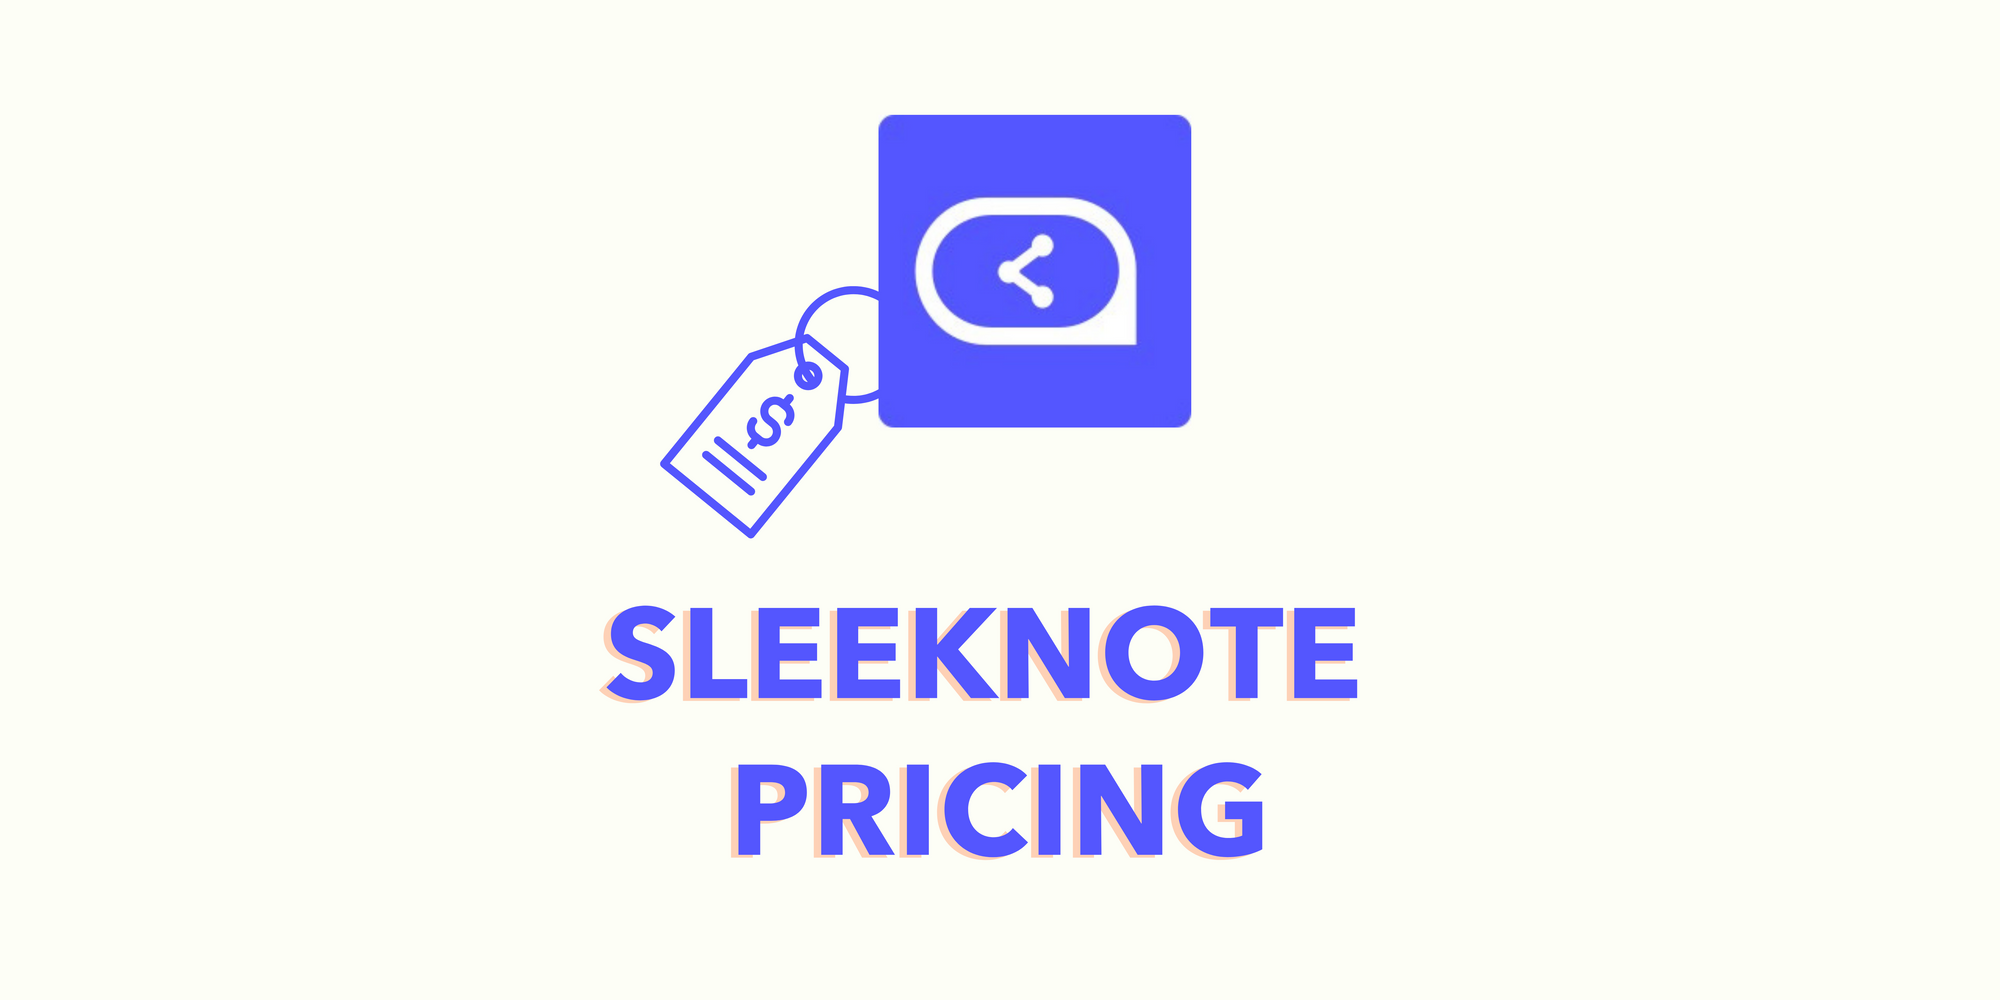 Sleeknote icon with price icon to emphasize the pricing of Sleeknote on fair background